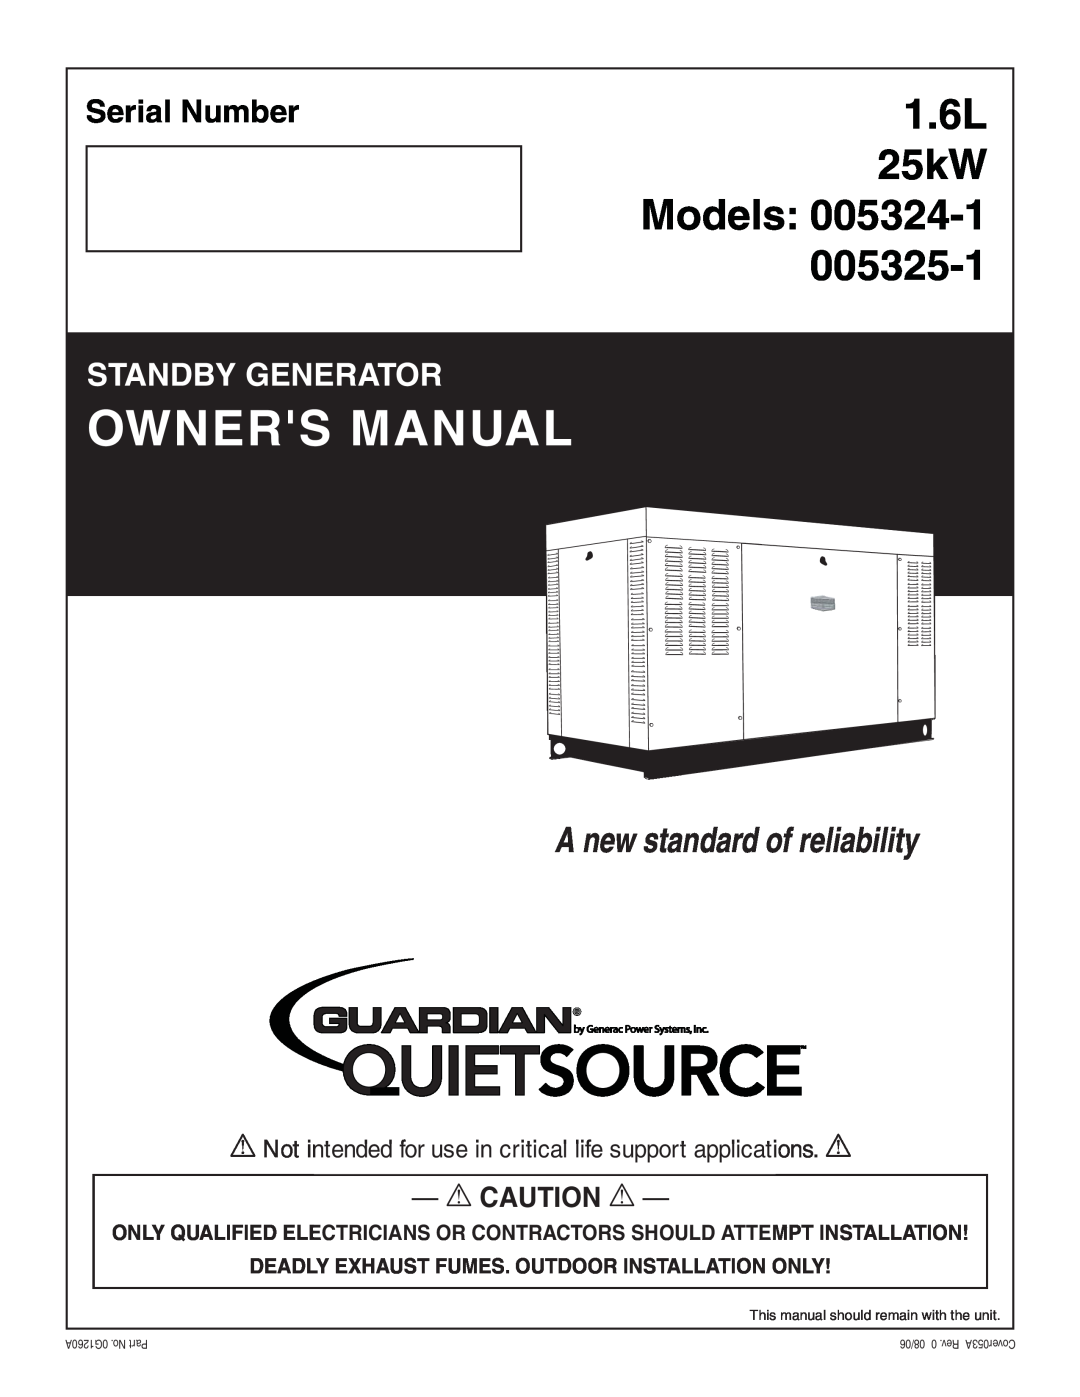 Generac Power Systems 005324-1, 005325-1 owner manual Deadly Exhaust Fumes. Outdoor Installation Only, 1.6L 25kW Models 